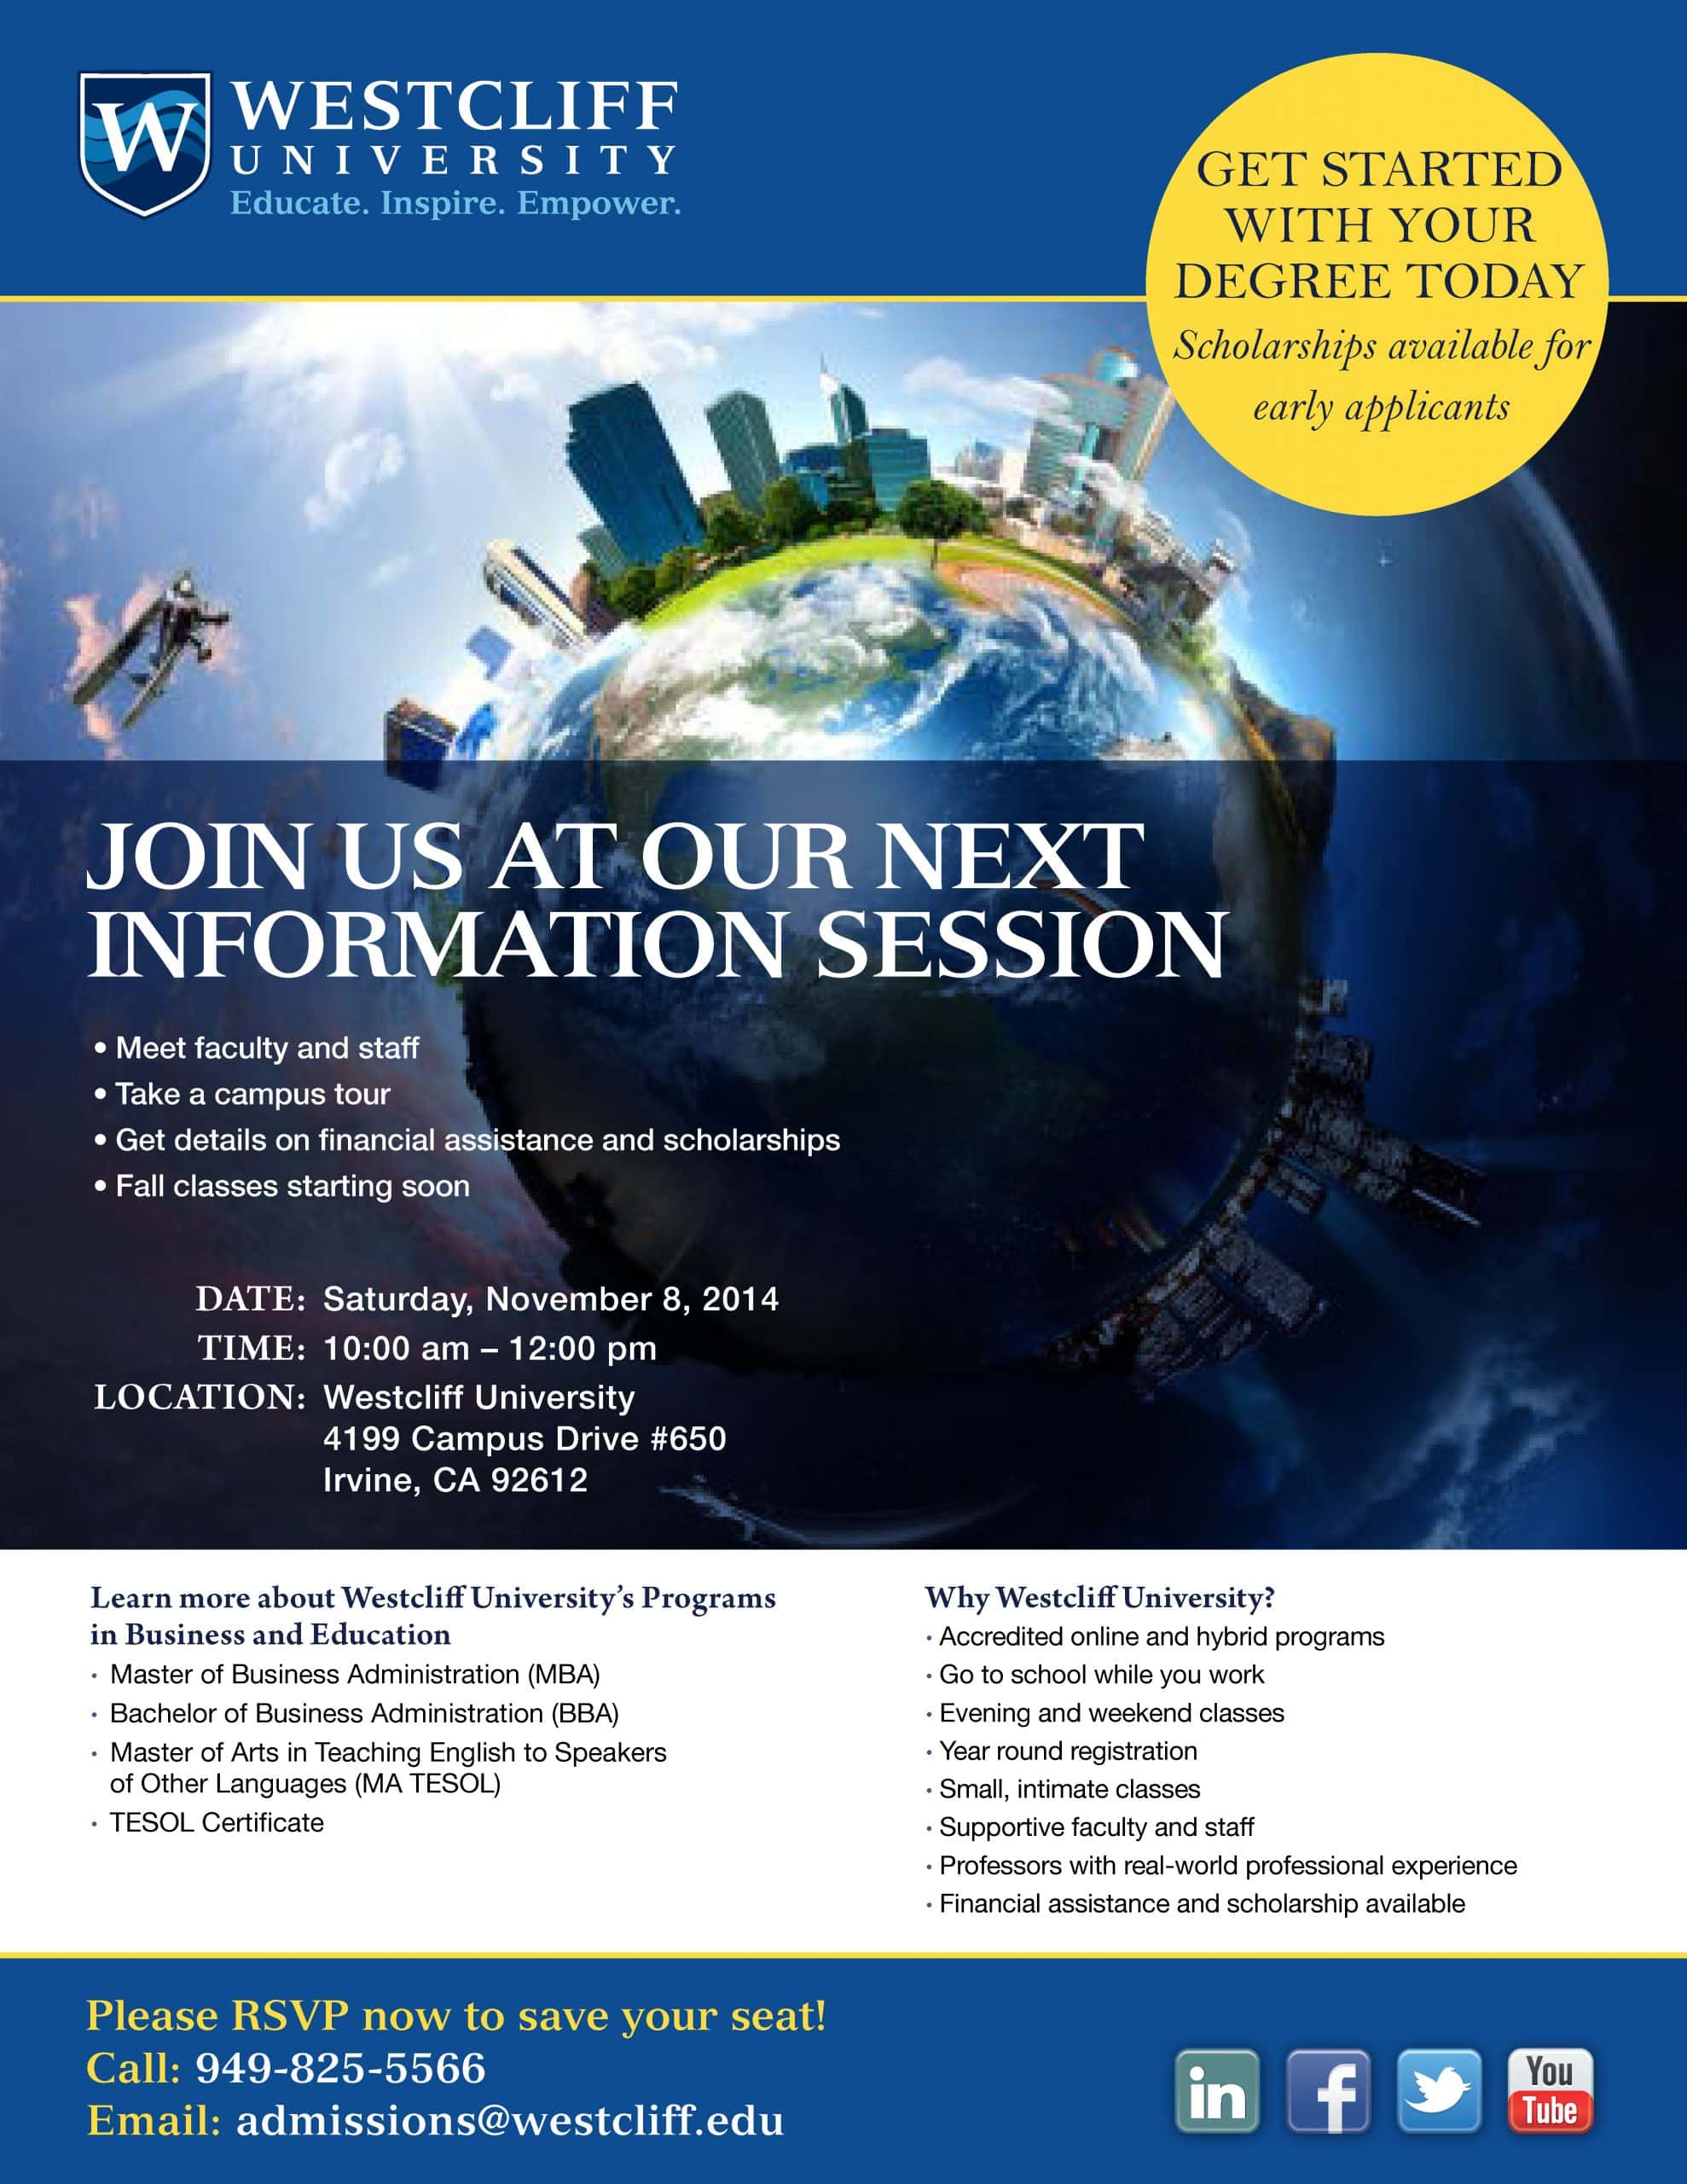 Information Session on Saturday, 05/02/2015 10AM-12PM